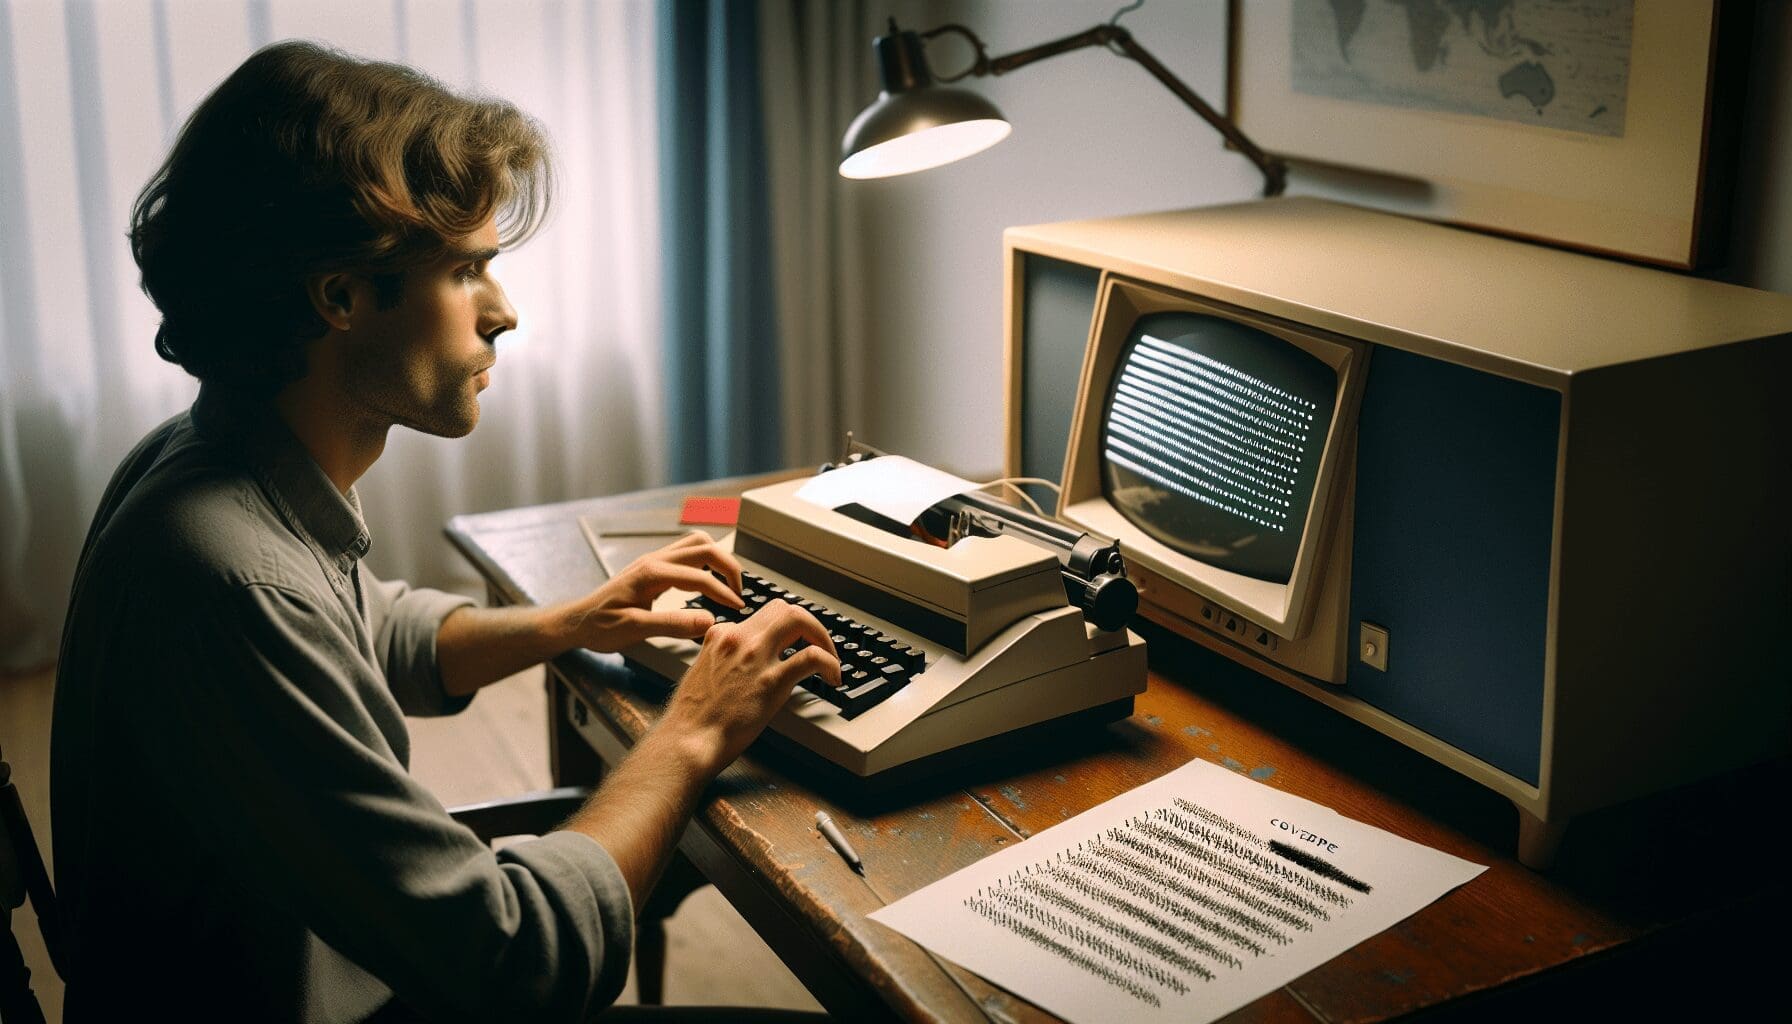 Illustration of composing a fax message